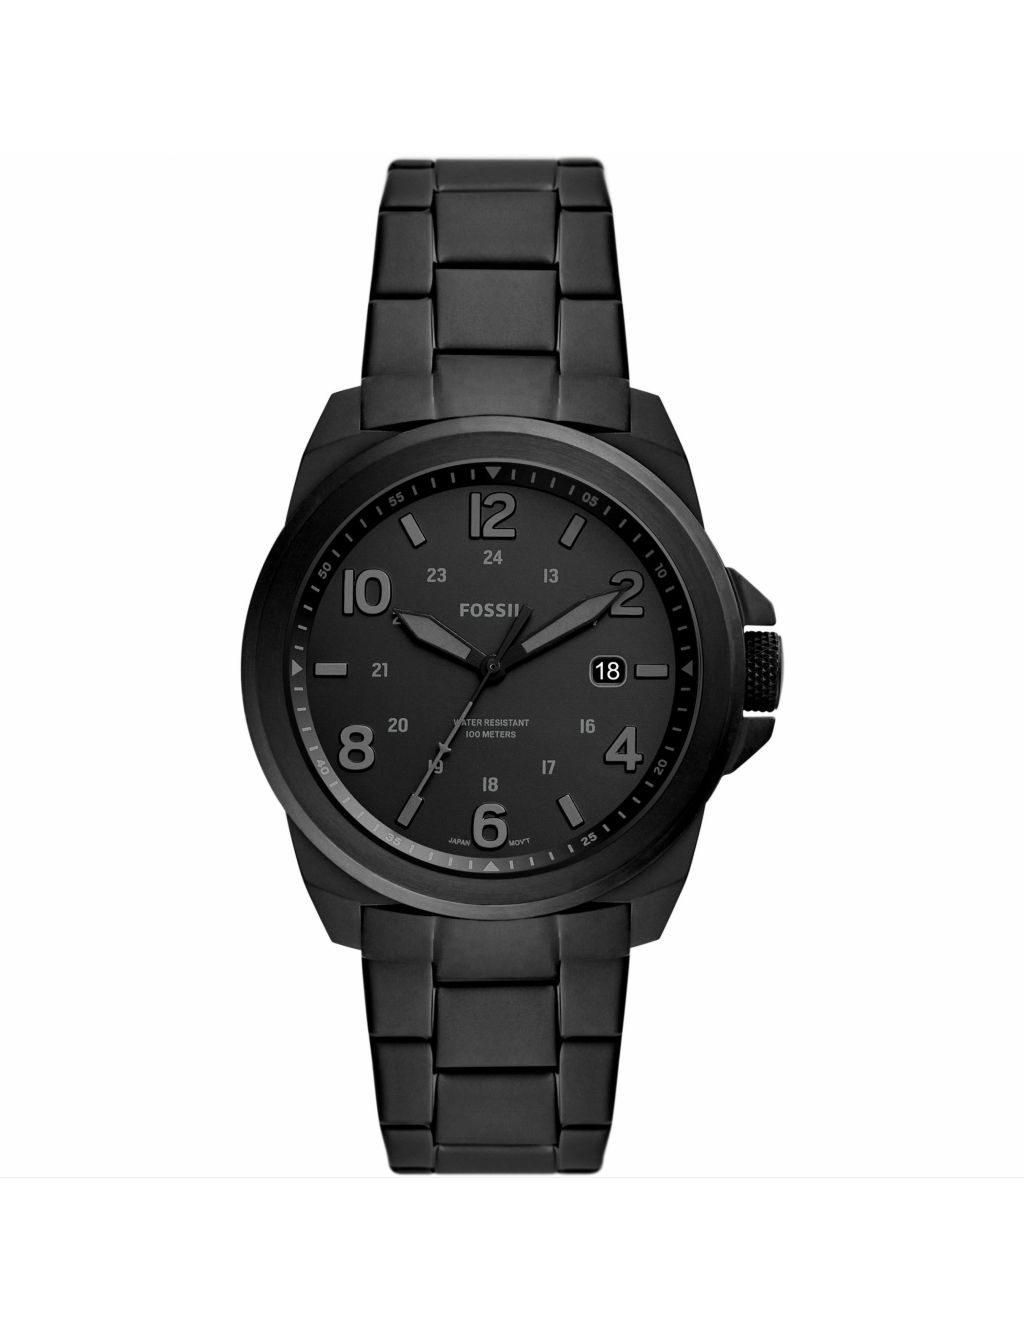 Fossil Bronson Black Stainless Steel Watch image 1